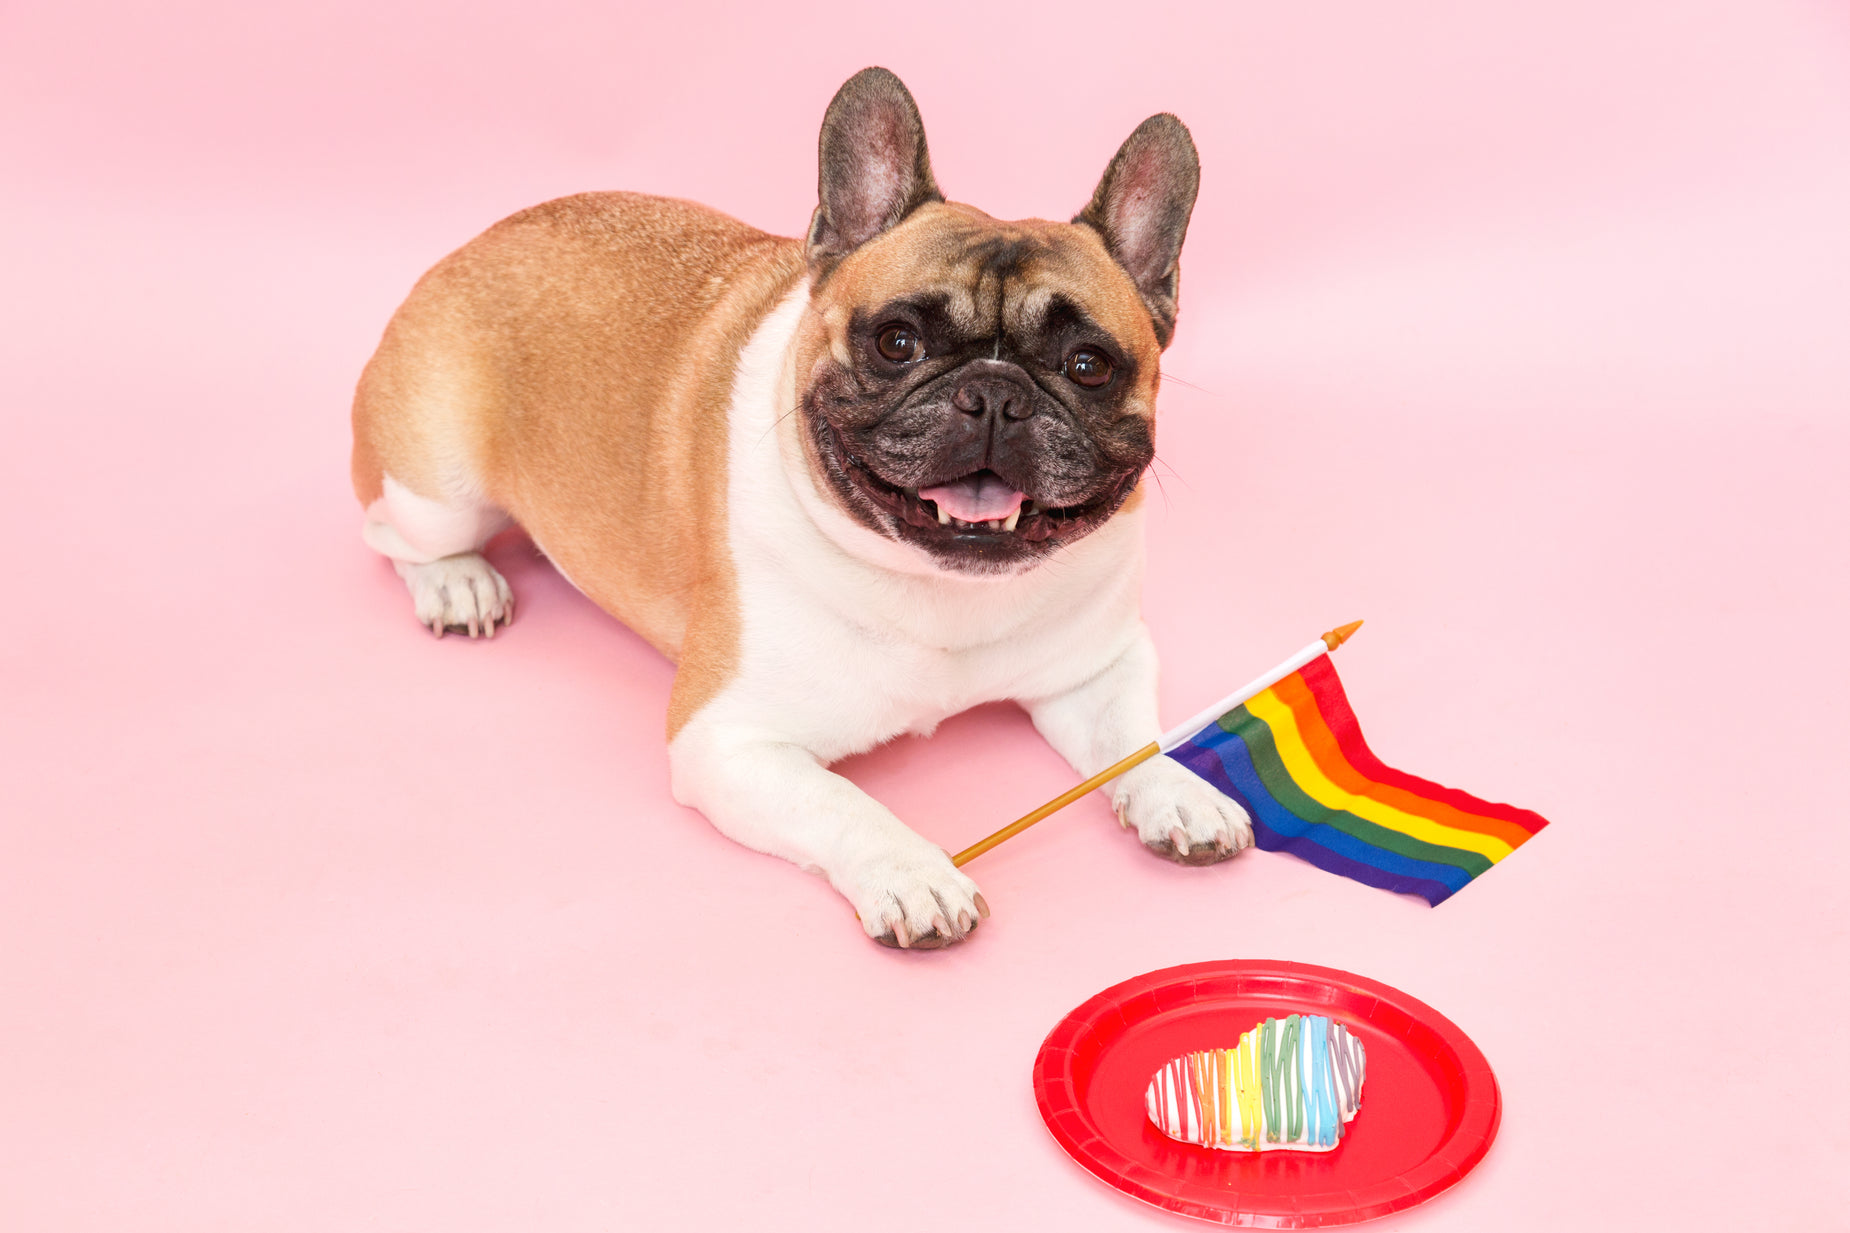 a dog sitting with a toy and a colorful pin